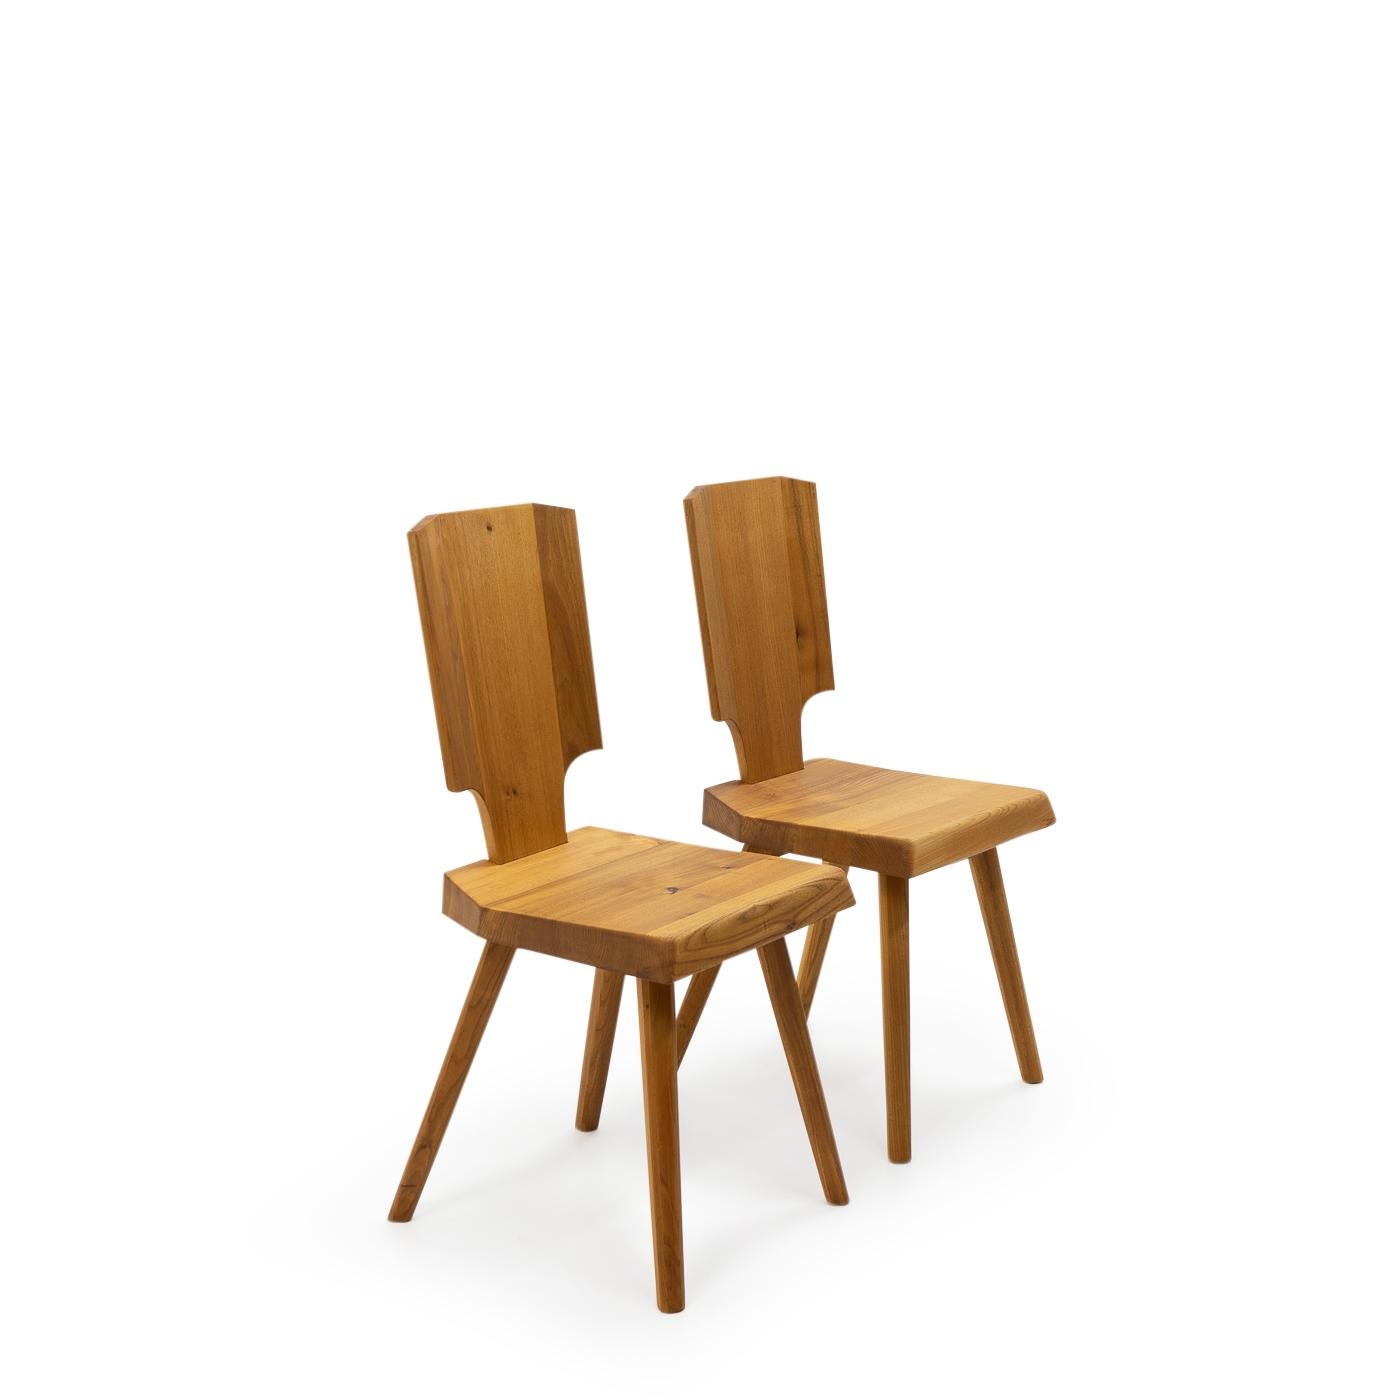 Vintage S28 chairs in elm: According to Pierre Chapo, the S28 is a modern interpretation of the traditional Alsatian chair, removed of any decorative elements, while maintaining its comfort and silhouette.

As with all furniture by Chapo, this